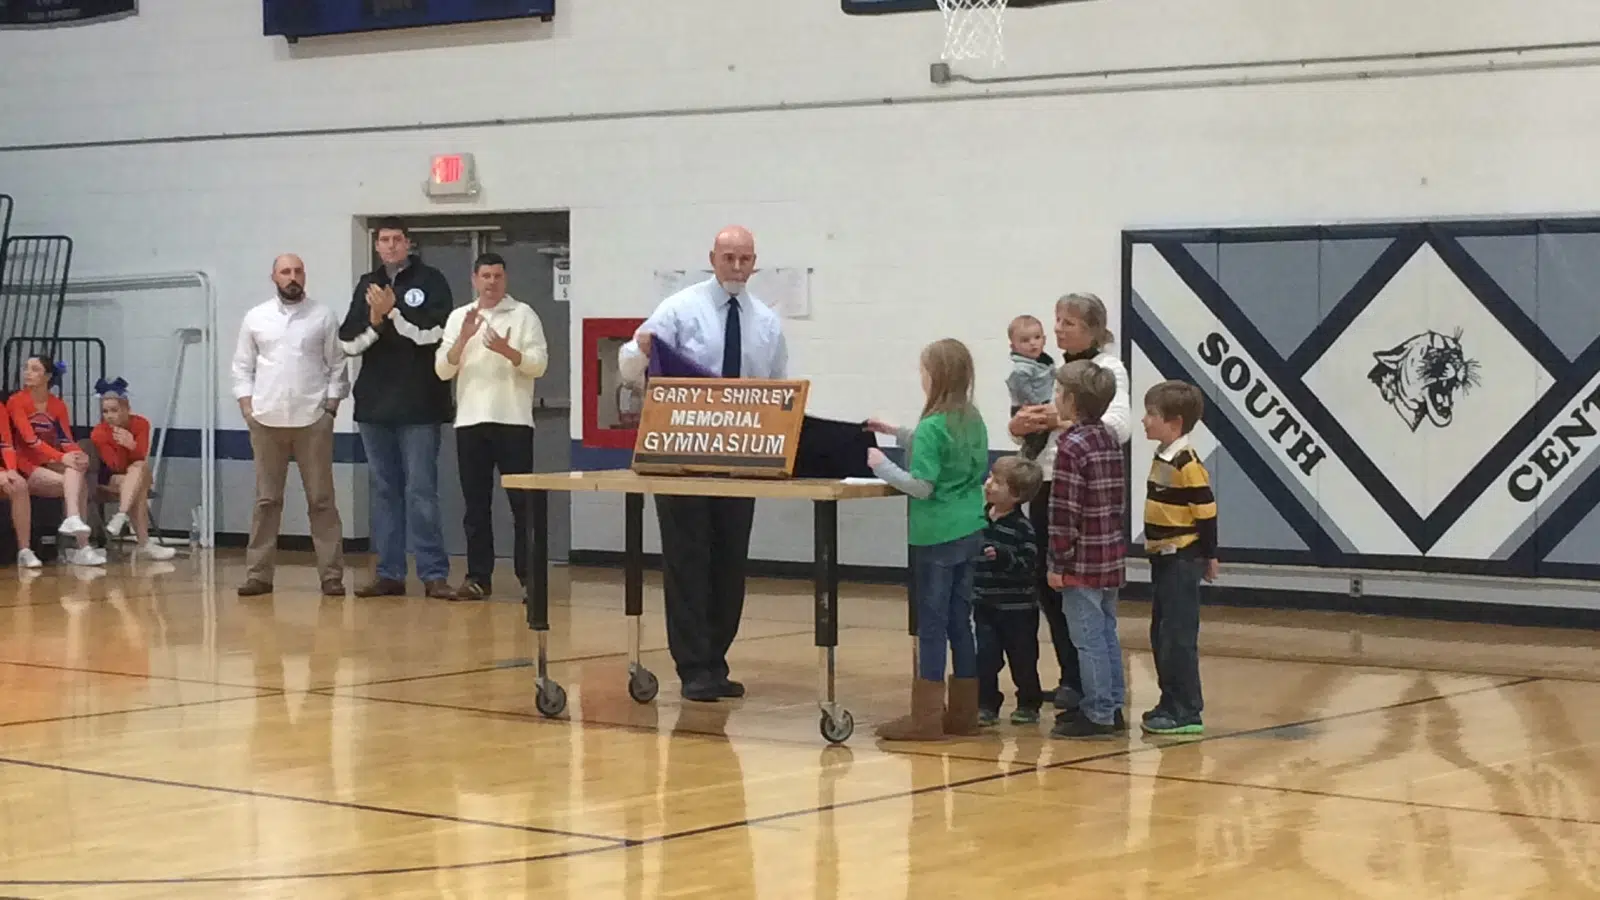 South Central HS gym officially named for Coach Shirley at Sat night ceremony